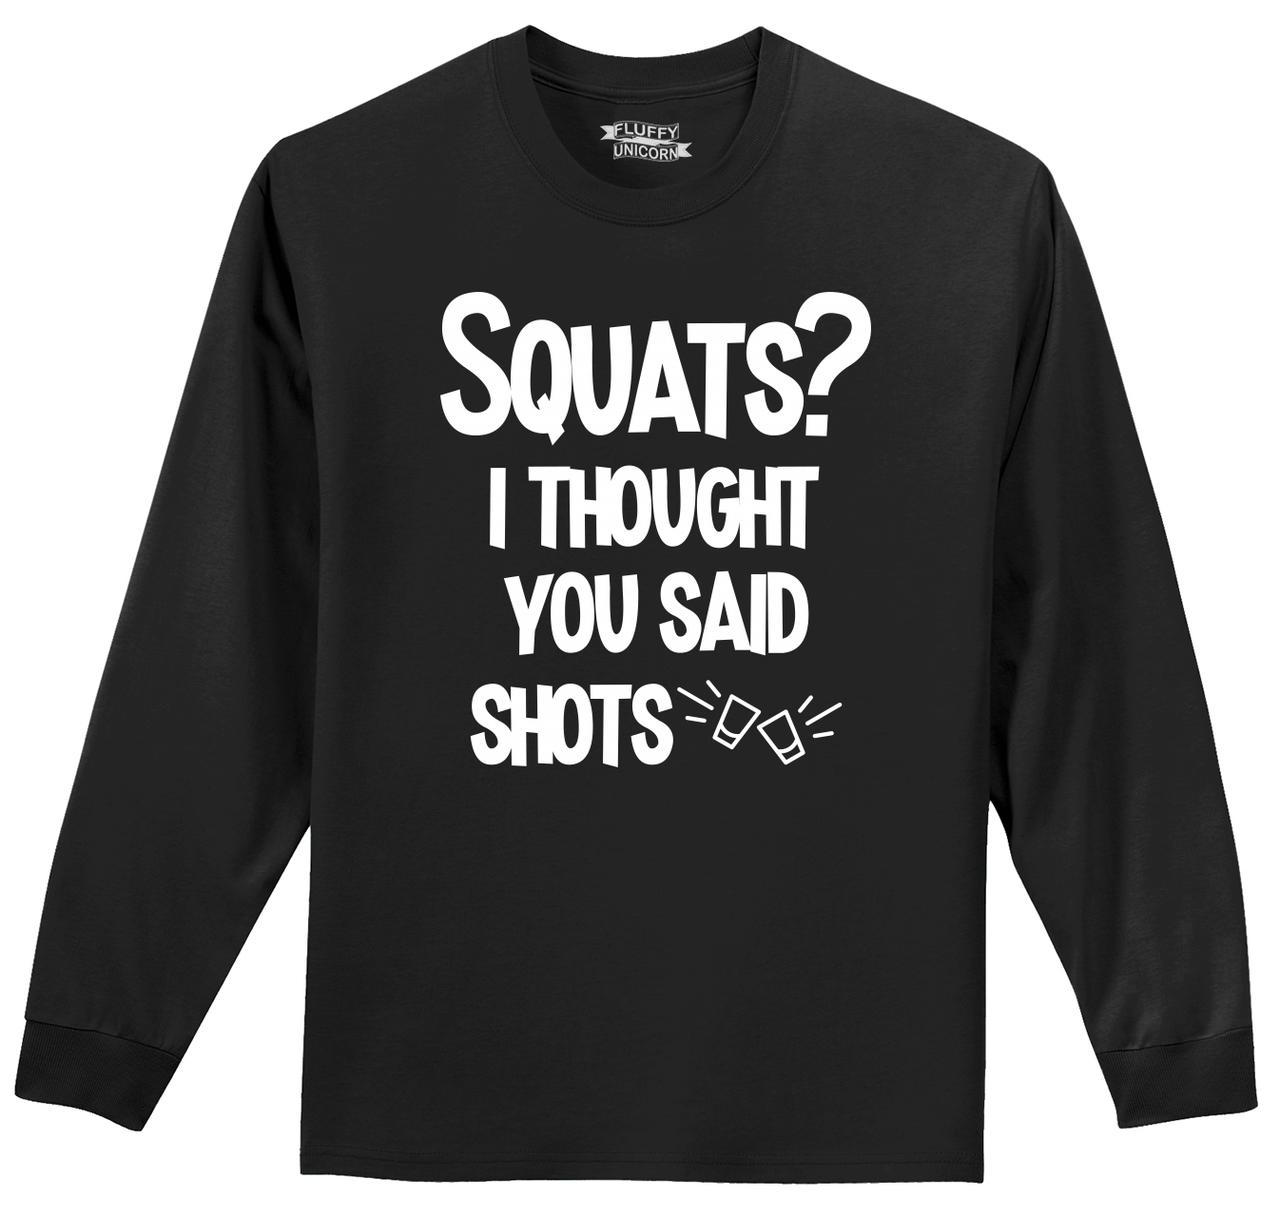 Workout shirt Funny Squats Shirt Squat shirt Squats Are My Therapy Hooded Sweatshirt Funny workout shirt Gym shirt Squat day shirt